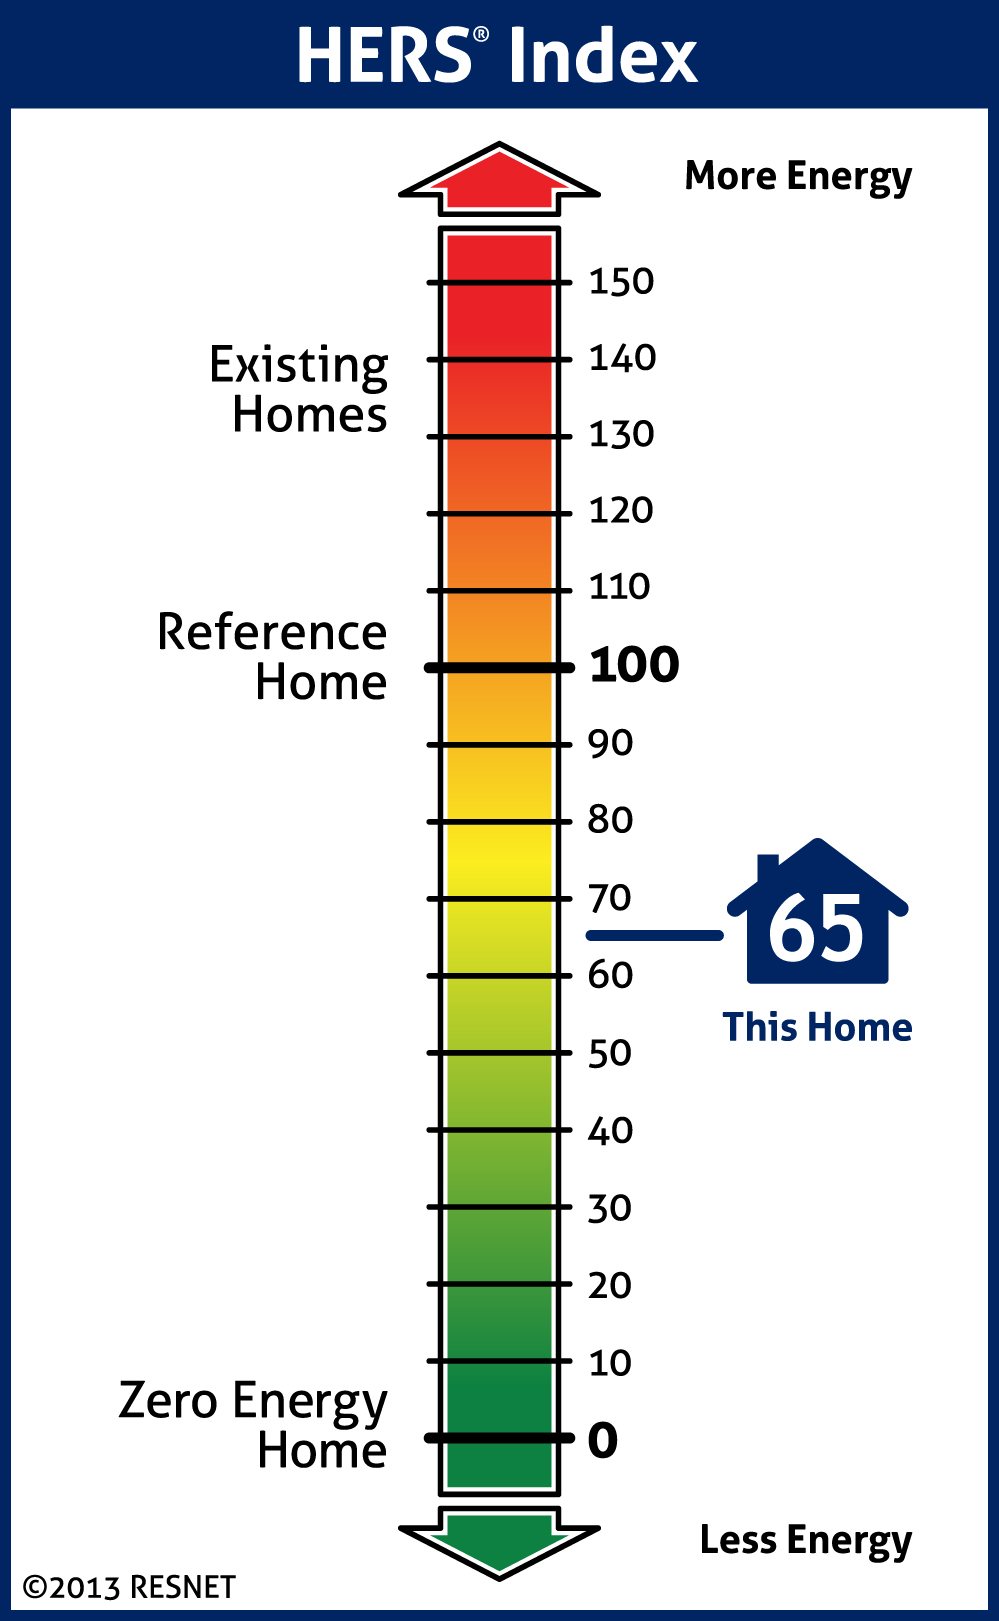 Who Evaluates the Energy Efficiency of Your House?